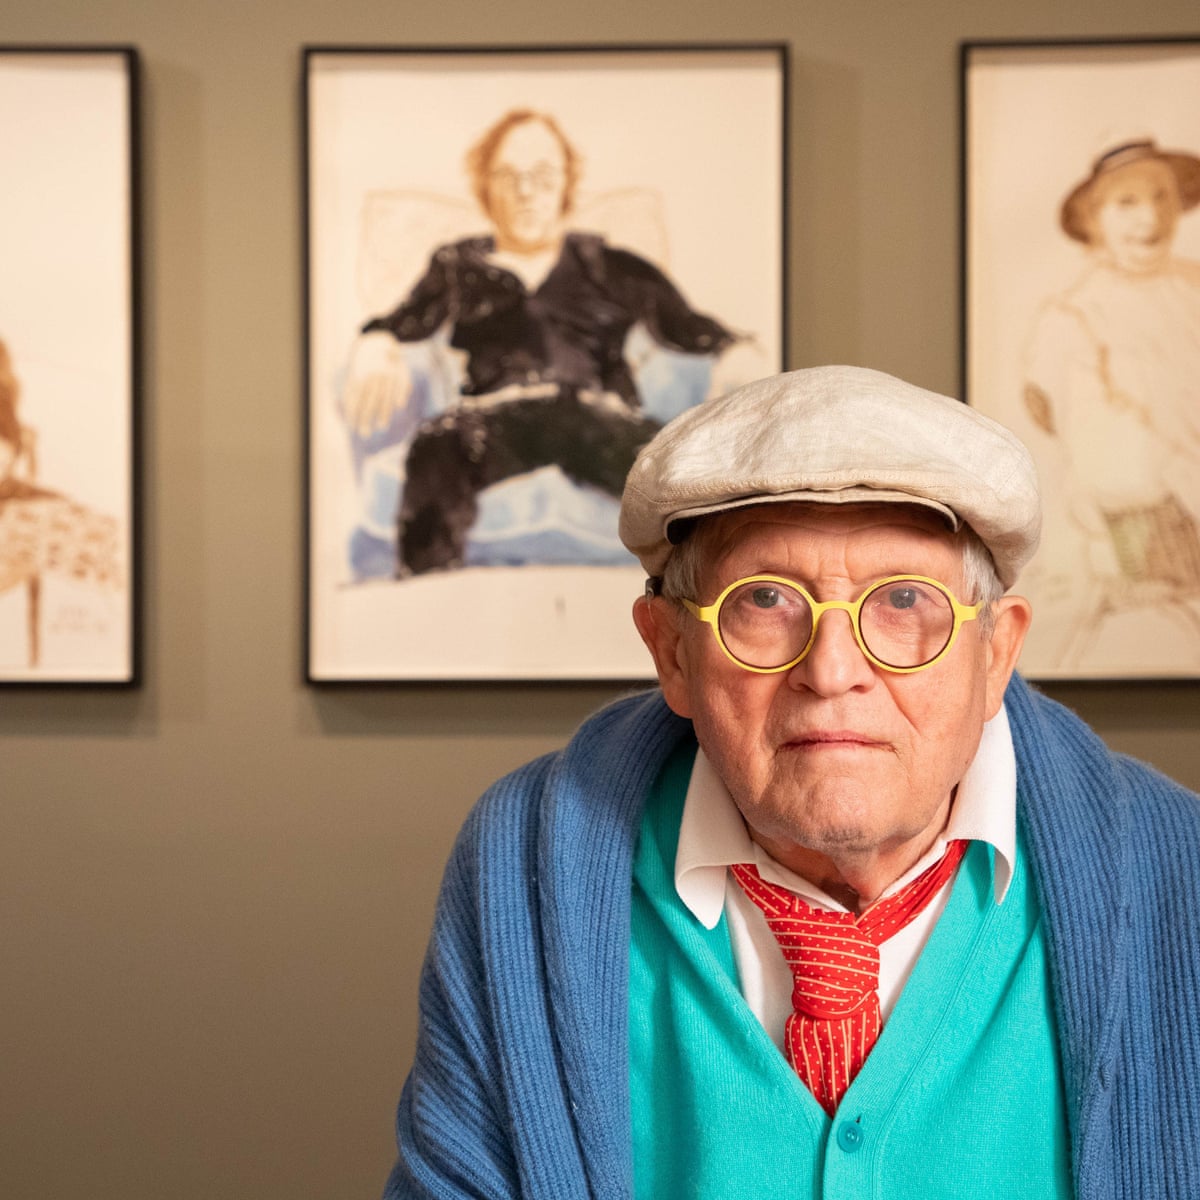 David Hockney: Drawing from Life review – stripping subjects down to their gym socks | Art | The Guardian